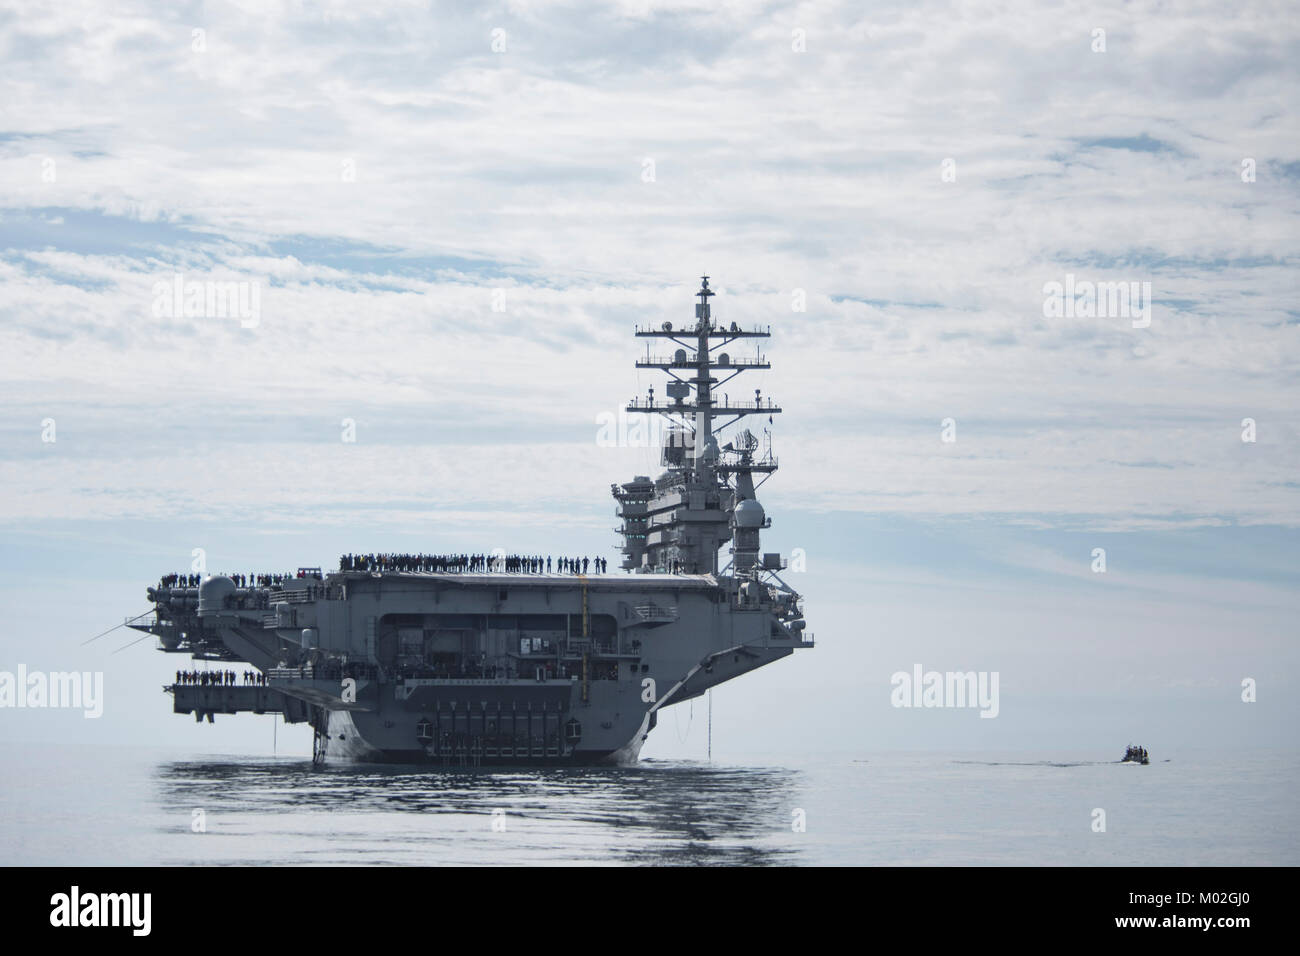 The aircraft carrier USS Dwight D. Eisenhower (CVN 69)(Ike) transits the Atlantic Ocean. Ike is underway during the maintenance phase of the Optimized Fleet Response Plan (OFRP). Stock Photo